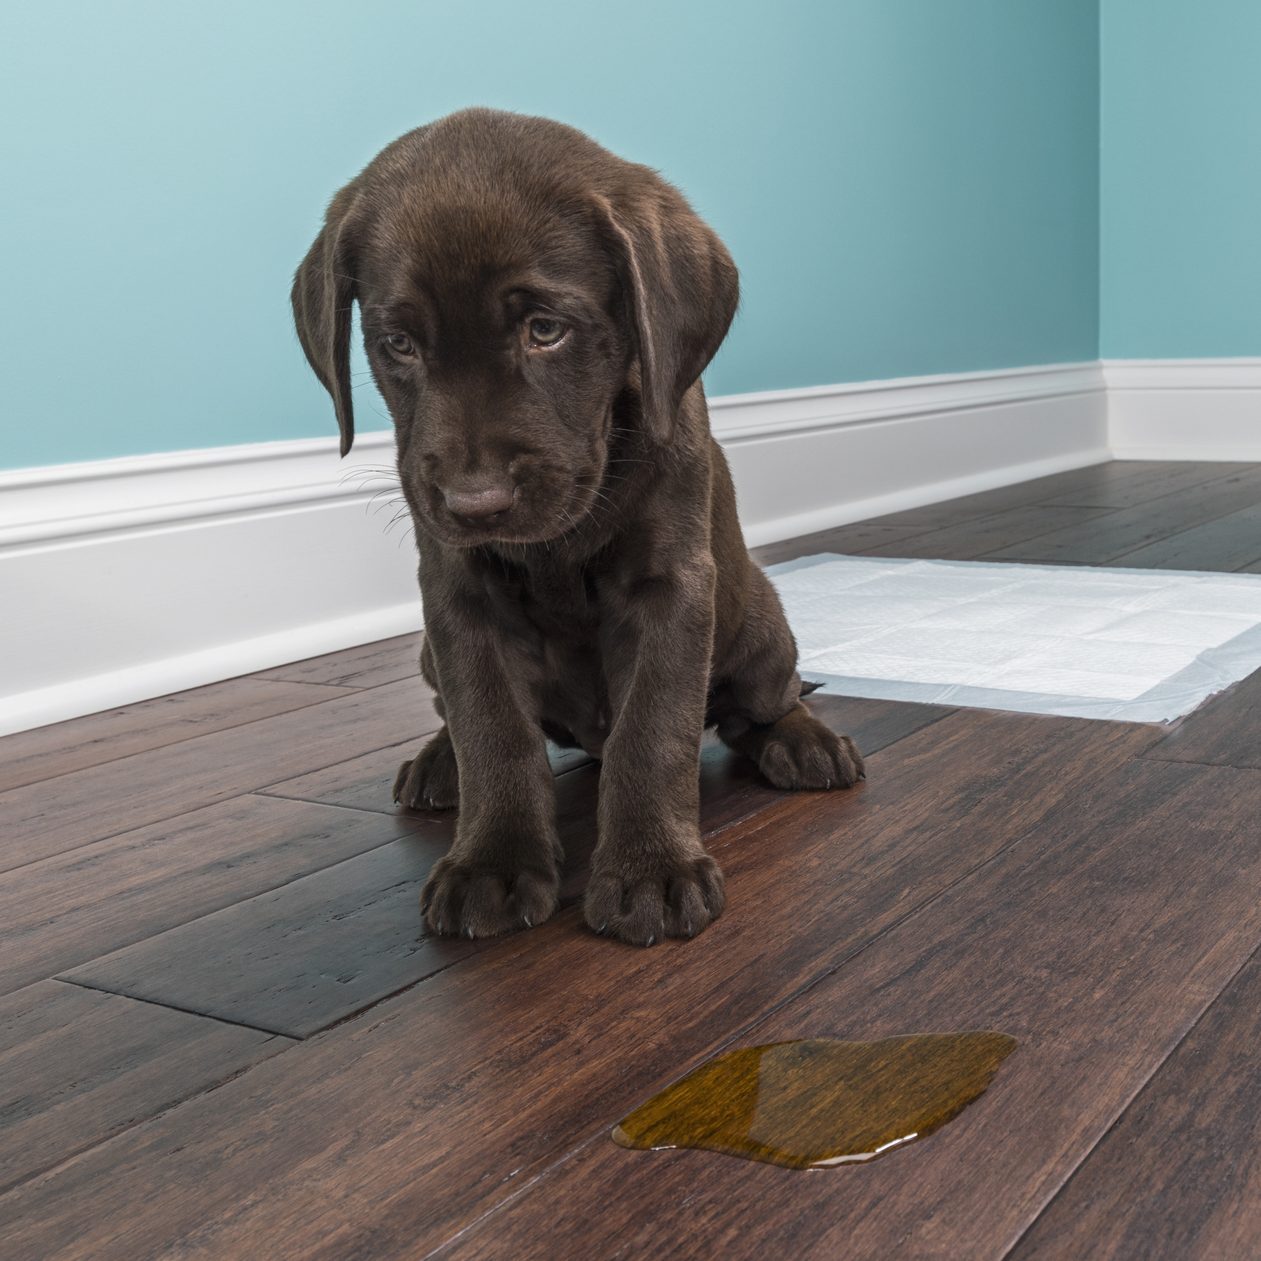 do puppies pee in the house for attention